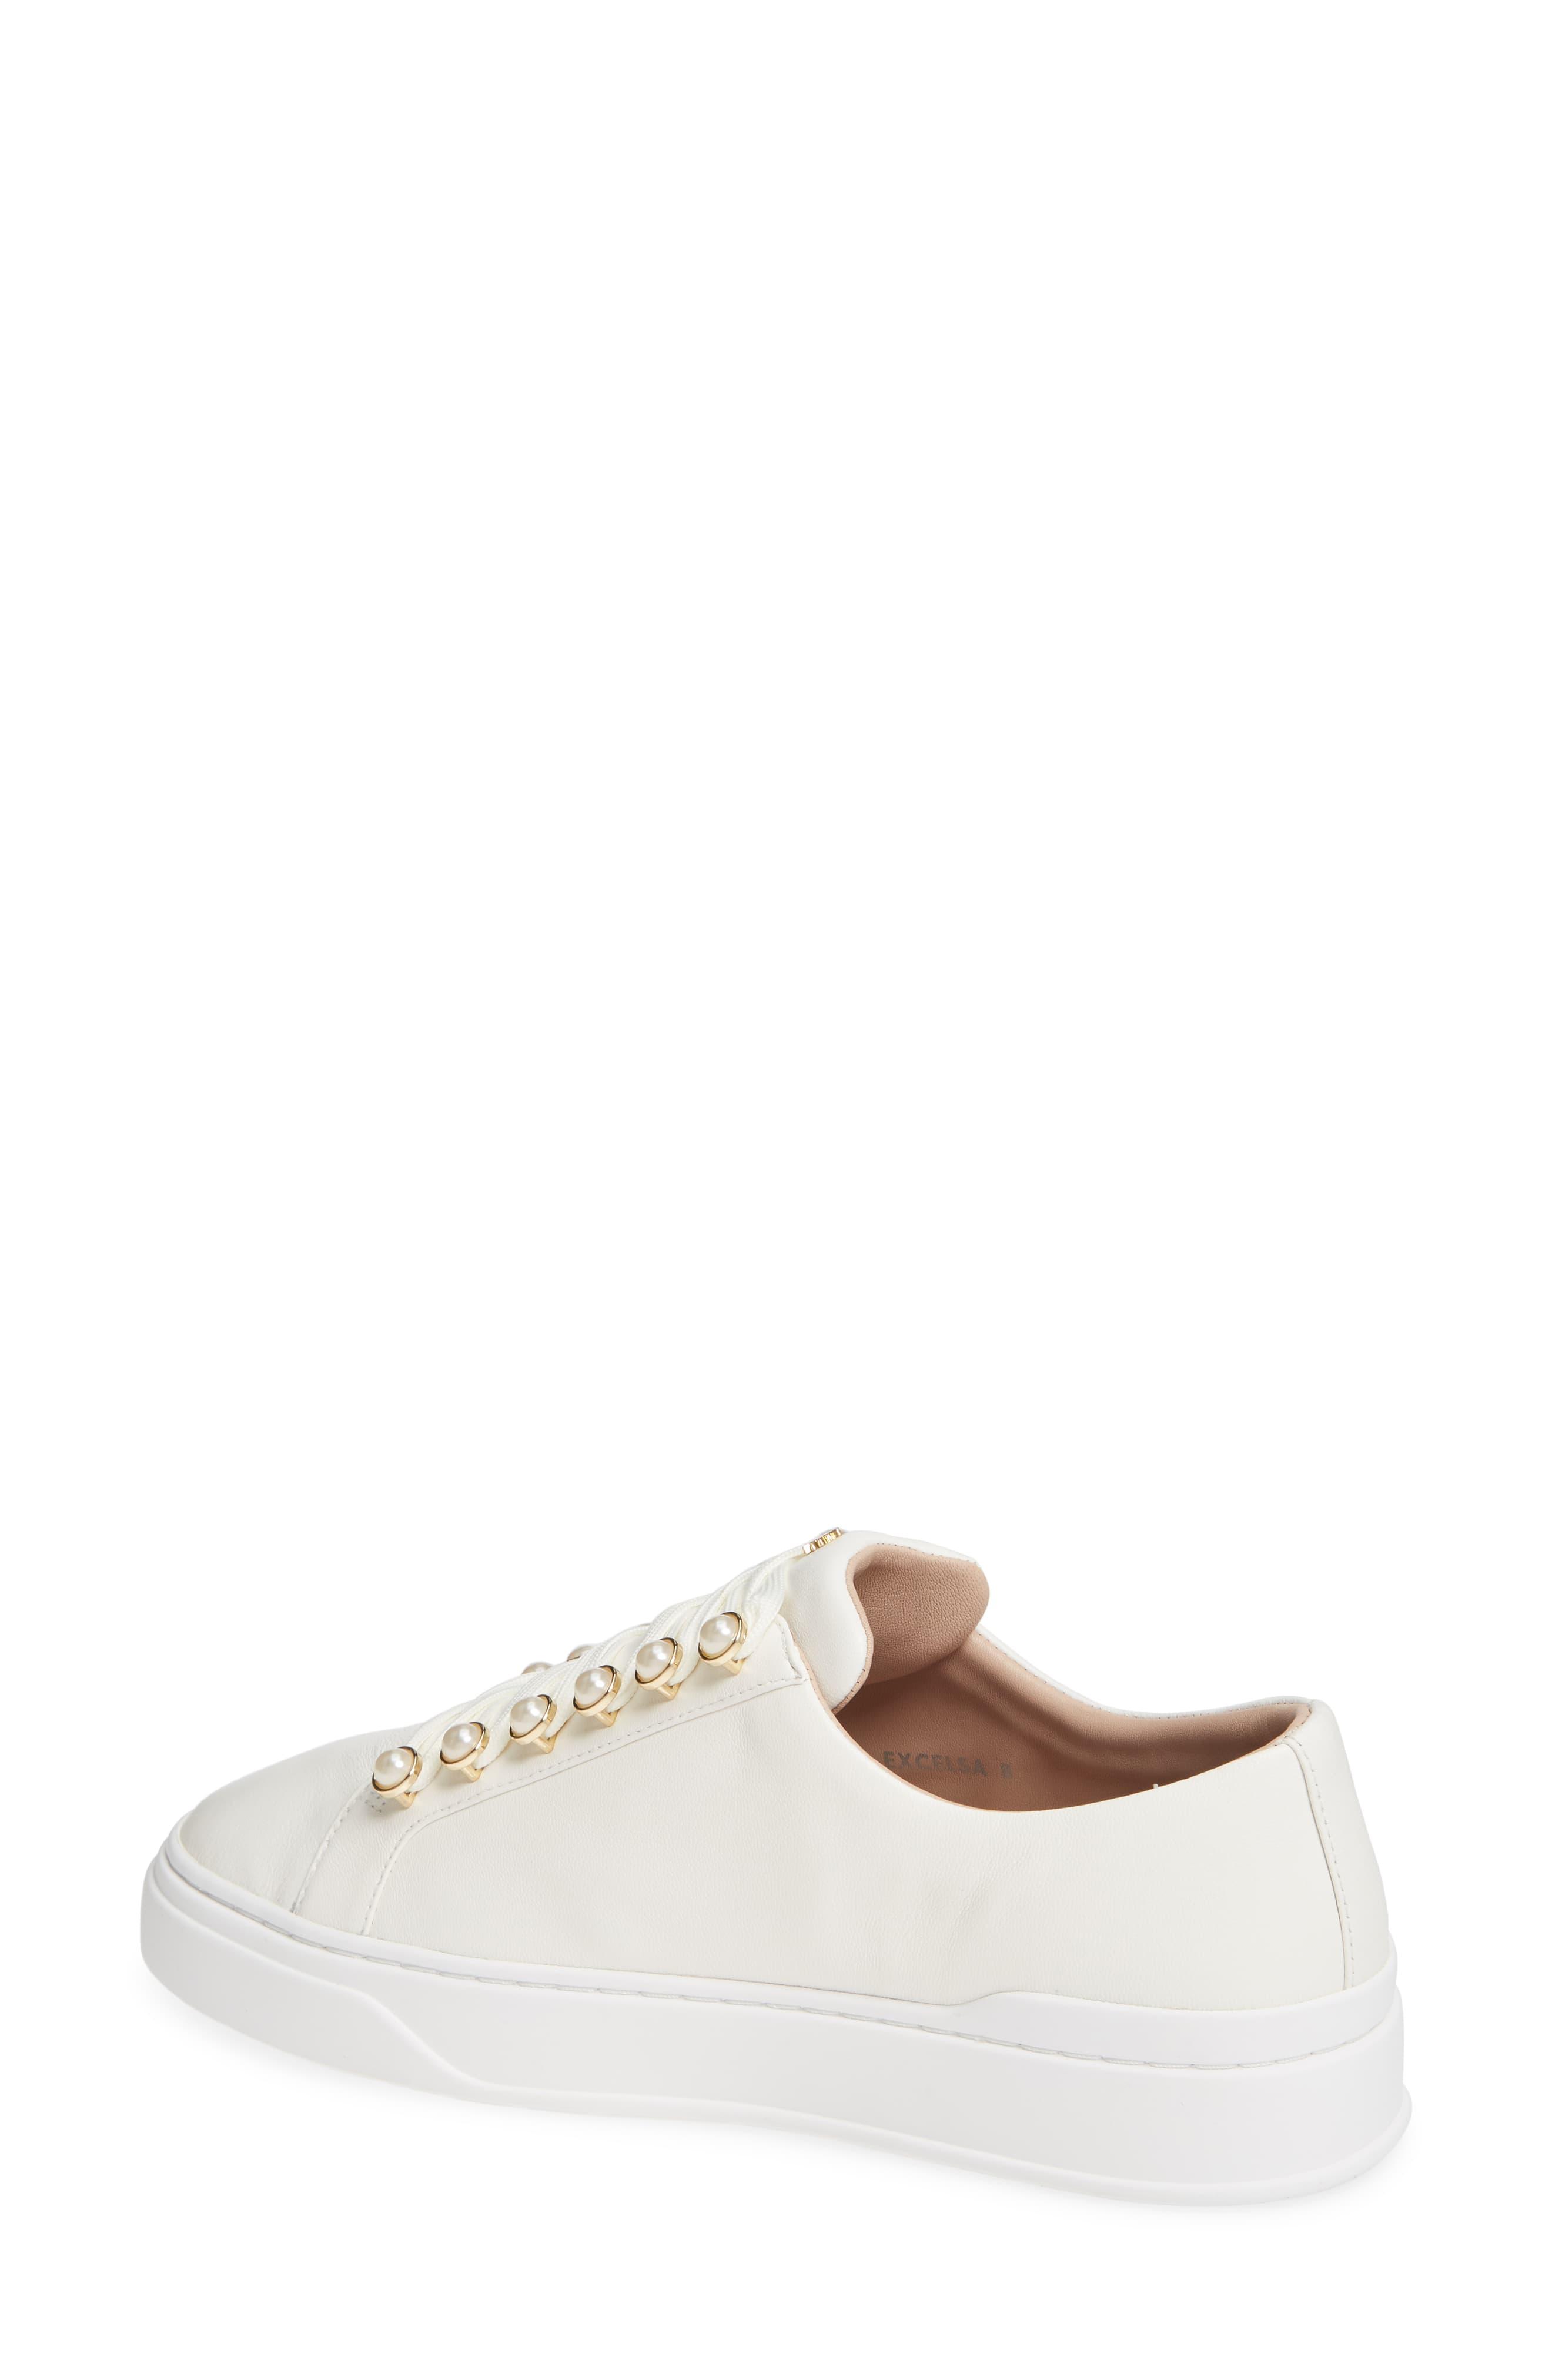 Stuart Weitzman Excelsa Imitation Pearl Embellished Lace-up Sneaker in ...